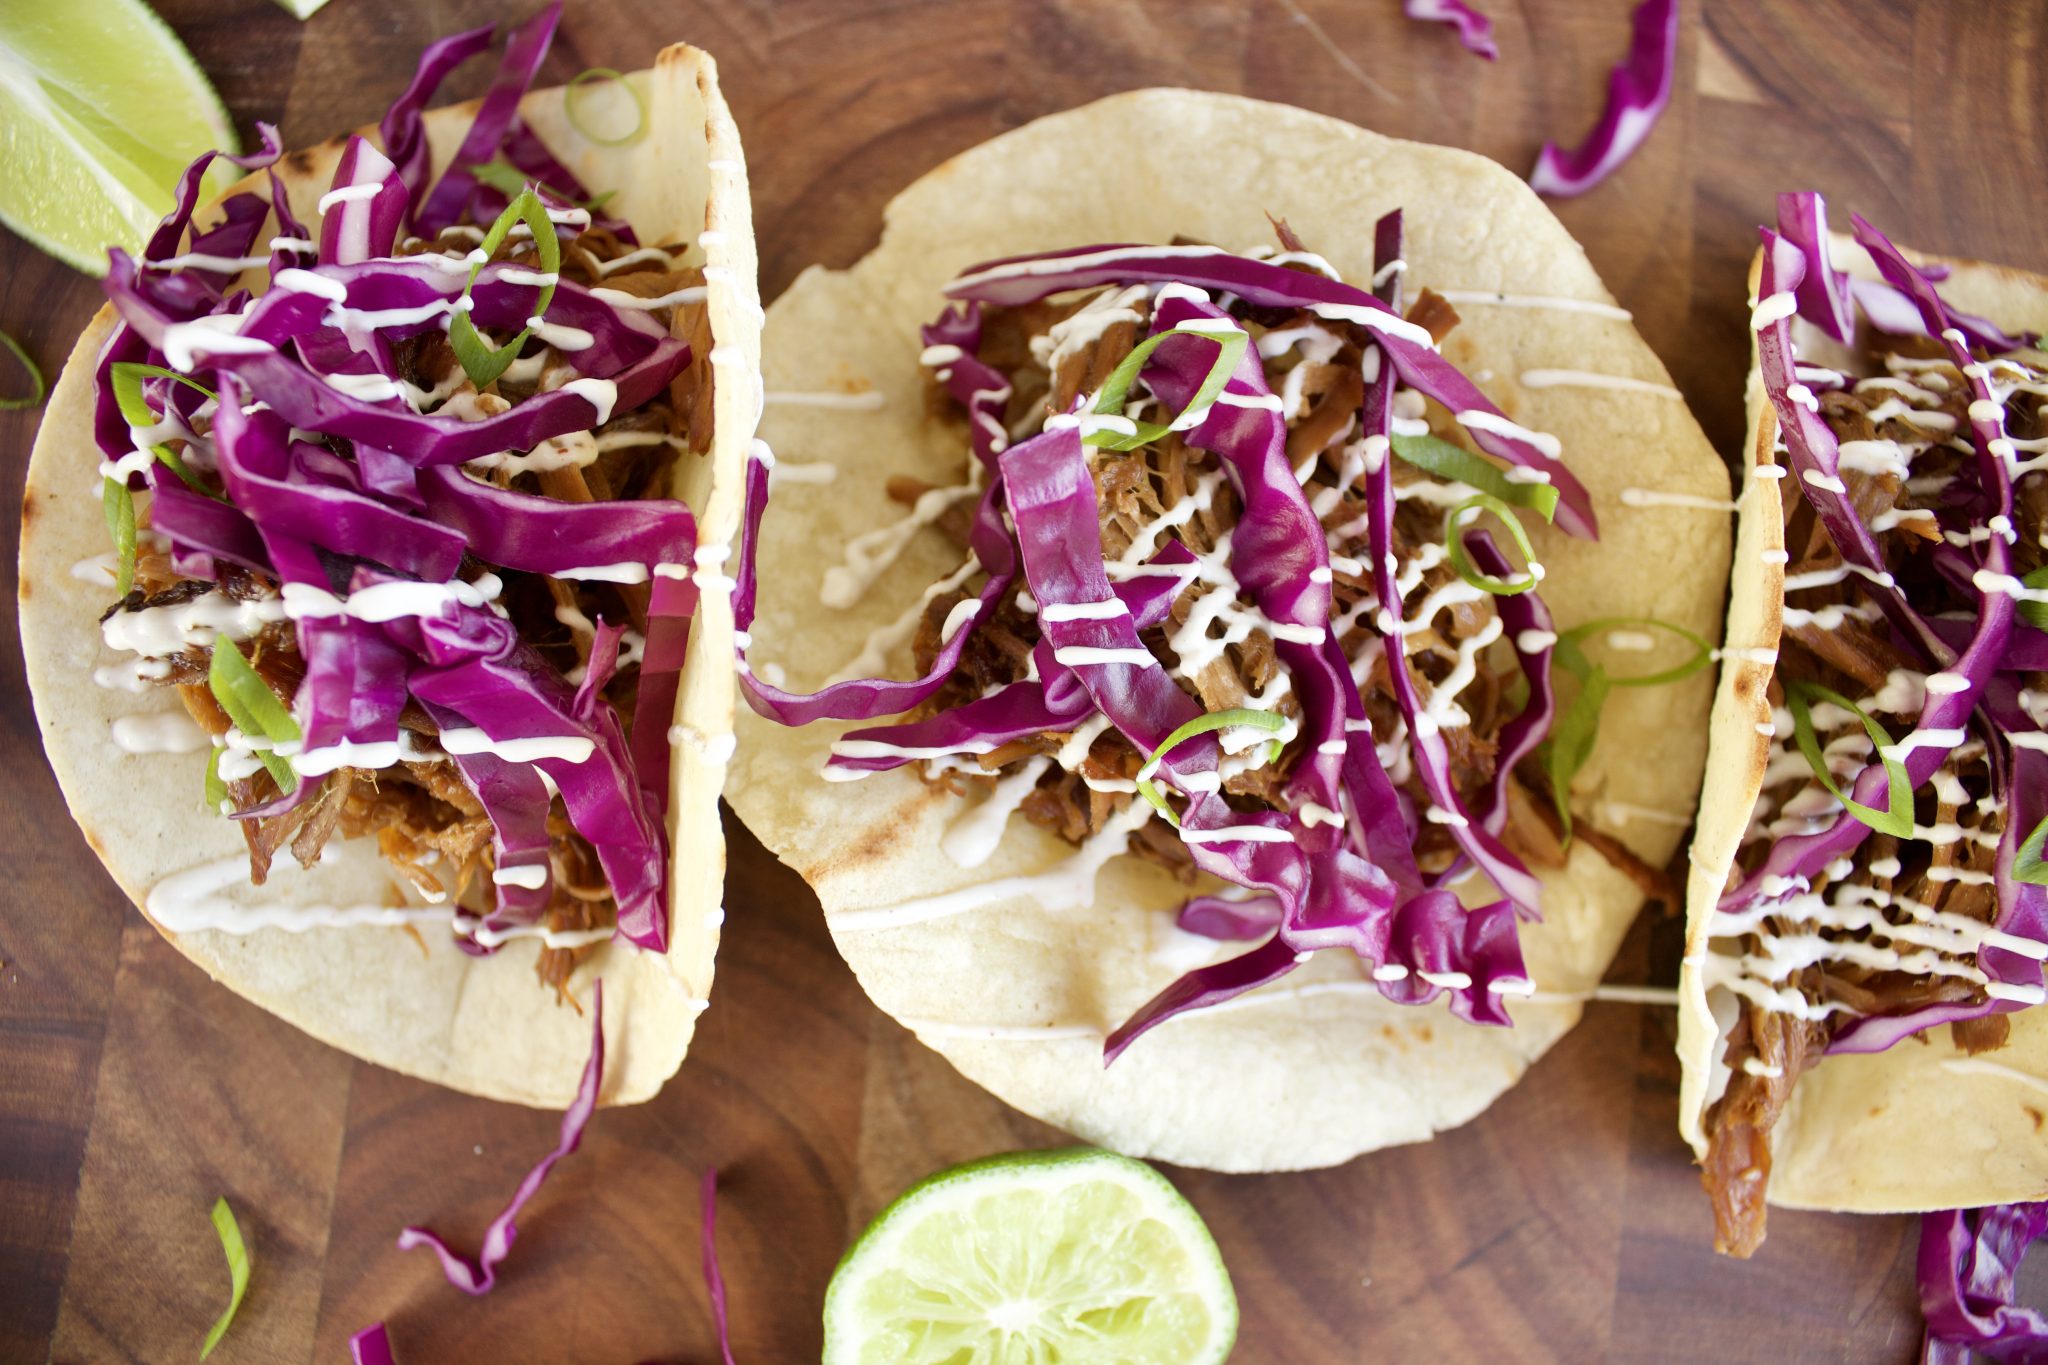 Pulled Pork Street Tacos - The Hungry Lyoness - Food Blog